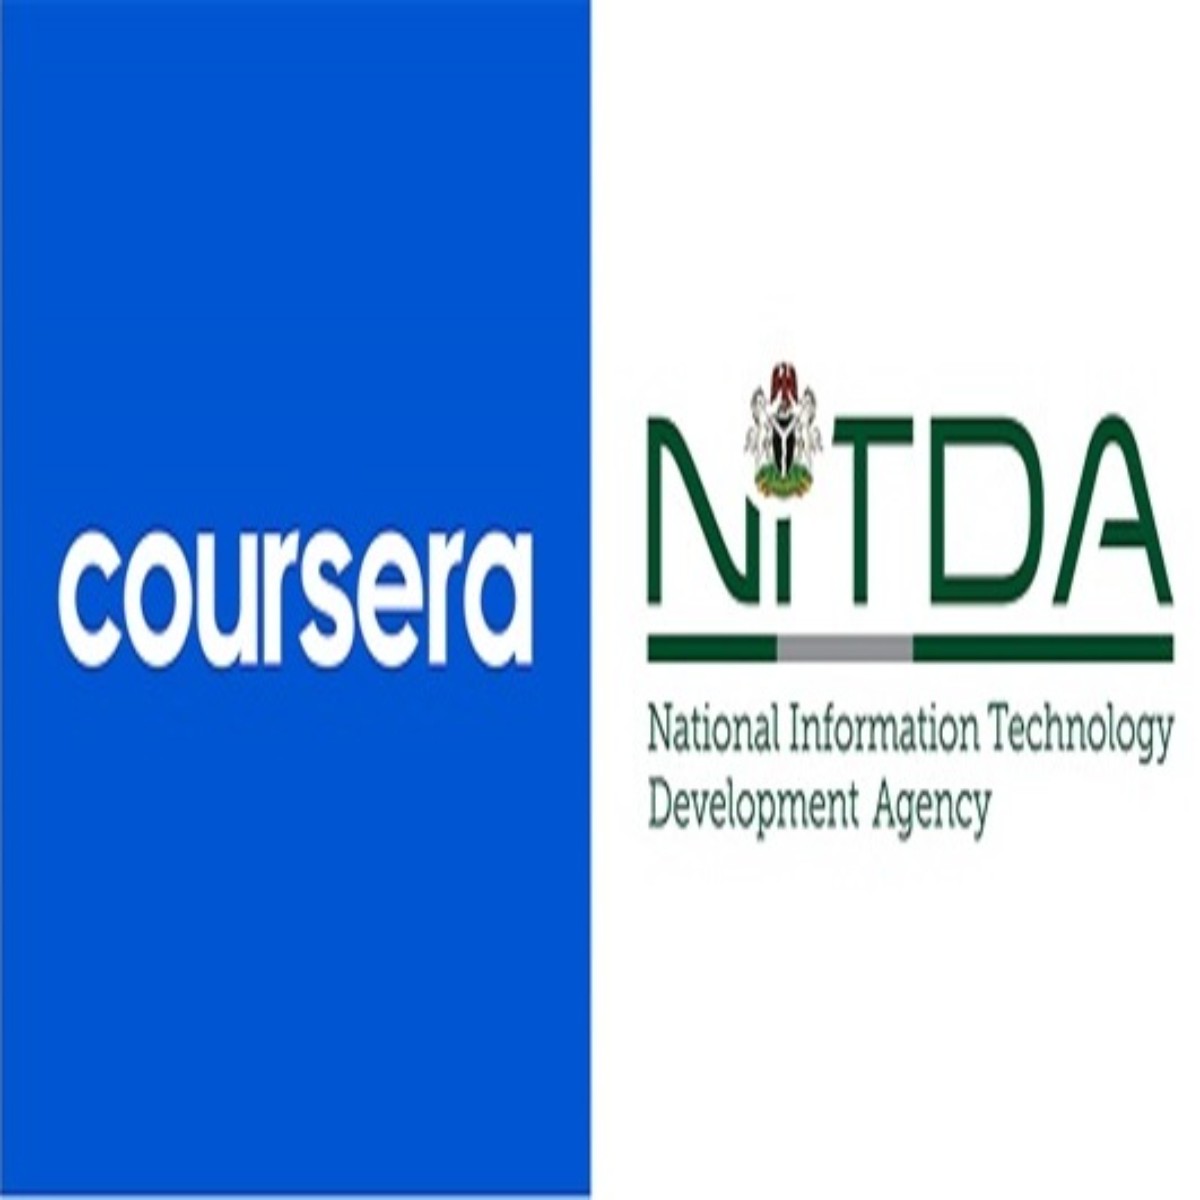 NITDA/Coursera 2023 Scholarship for Nigerian Citizens (Fully-funded)